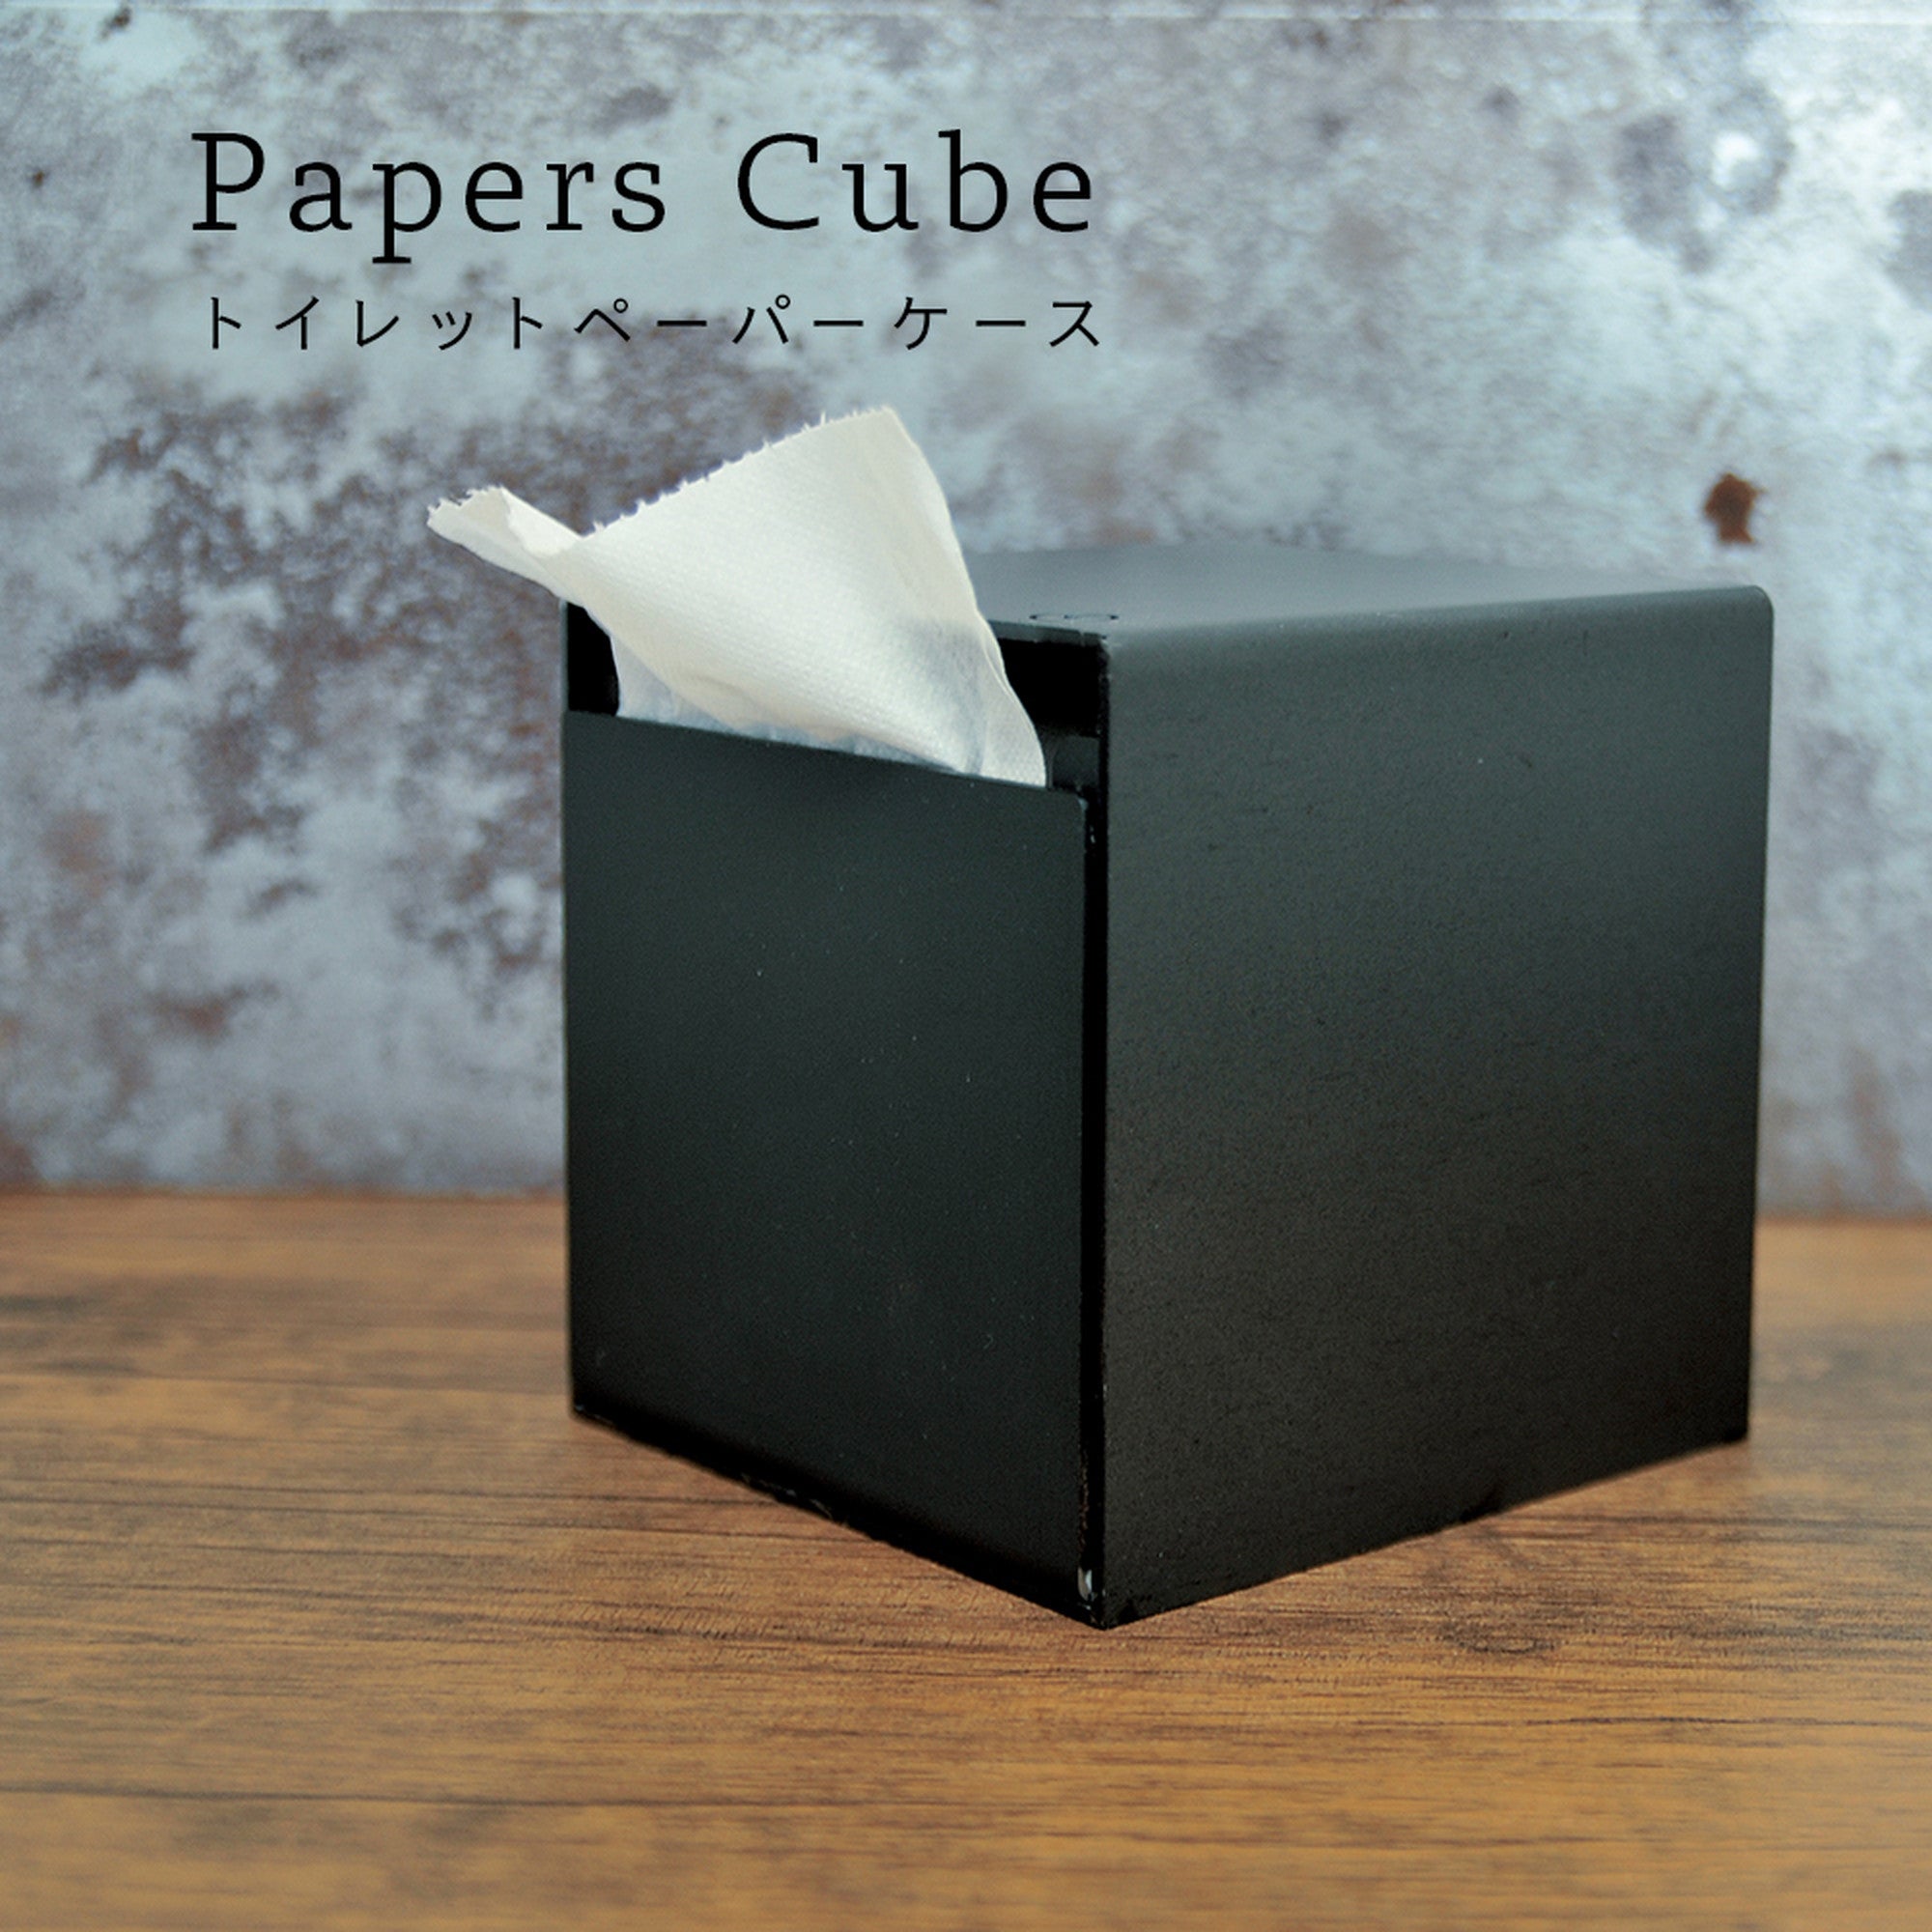 Papers Cube　黒皮鉄